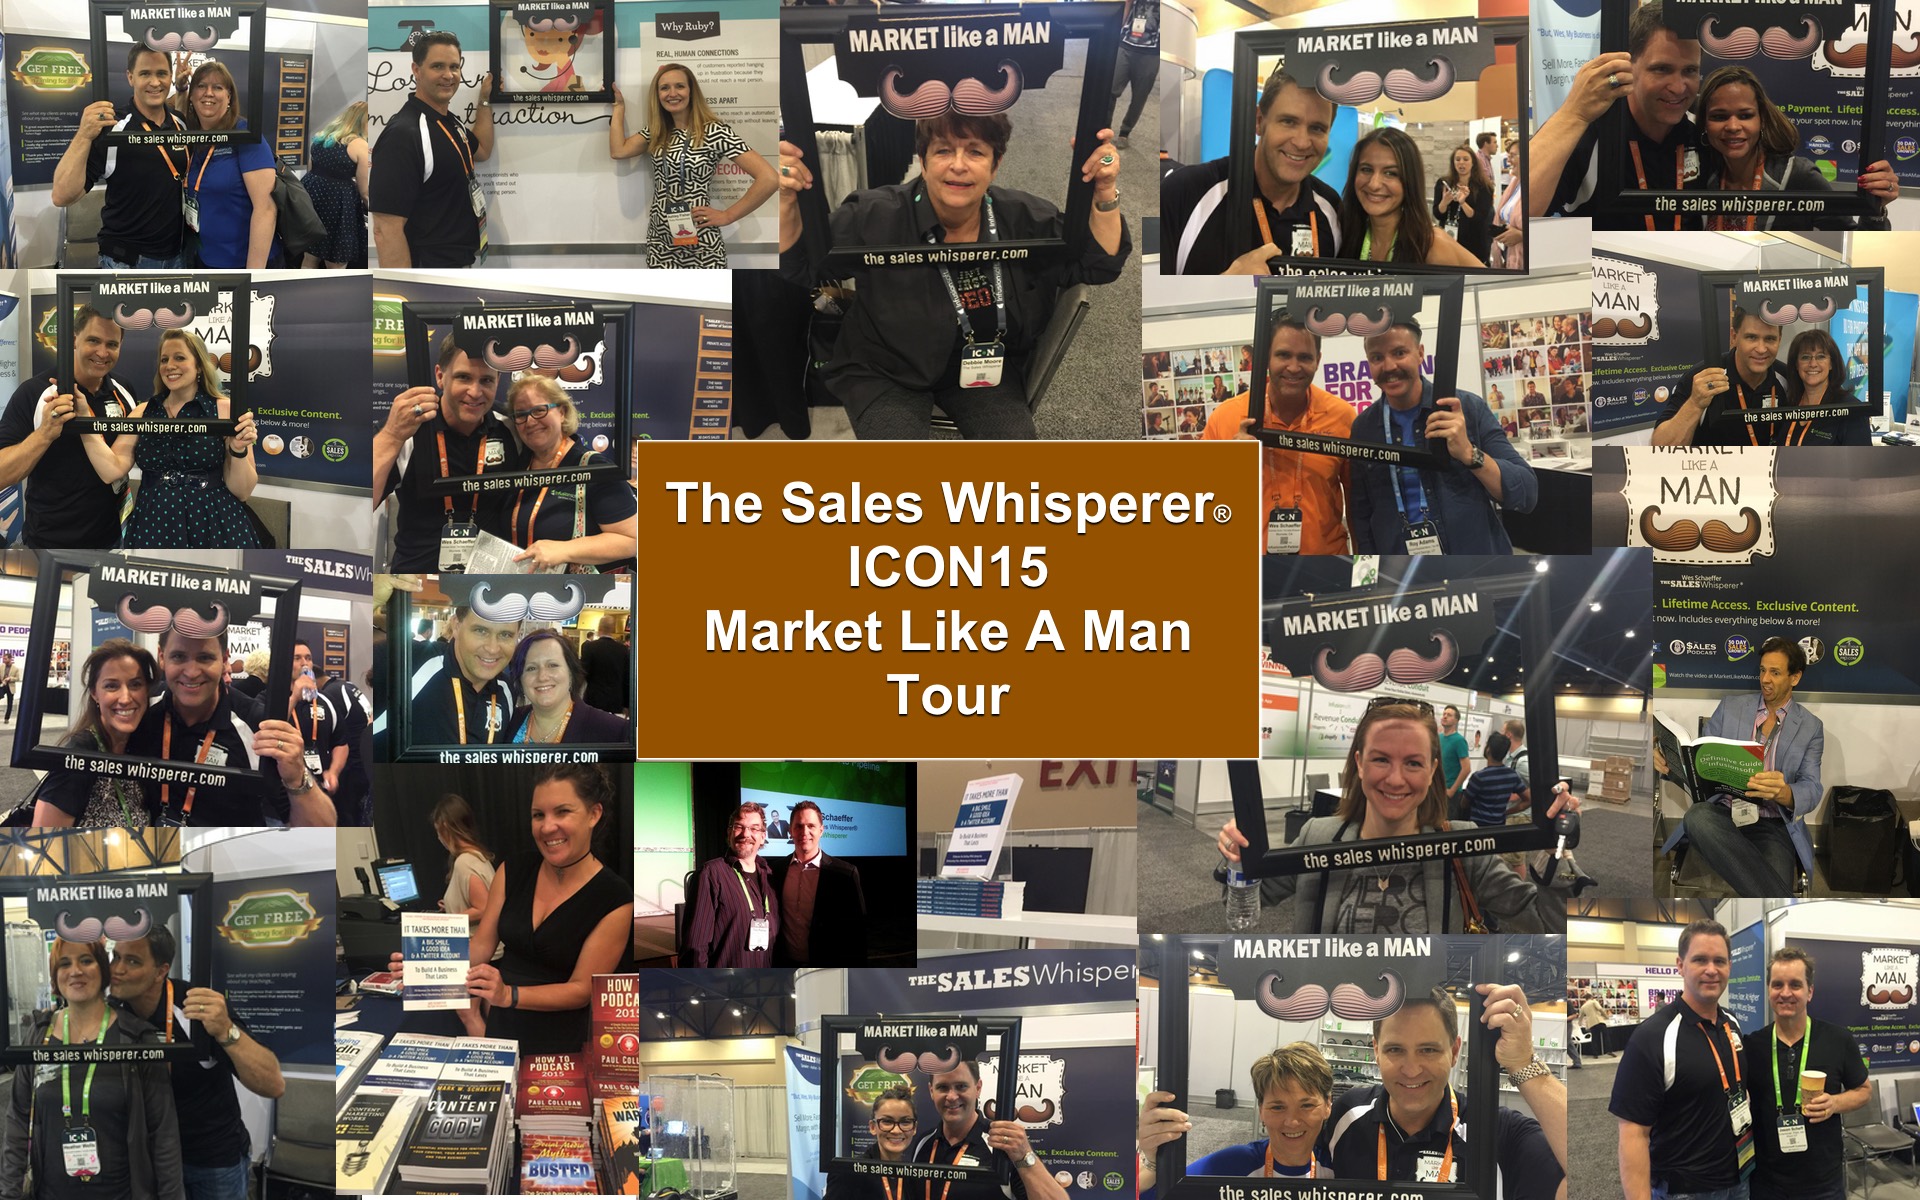 ICON15 trade show booth collage where Wes Schaeffer, The Sales Whisperer® marketed like a man.